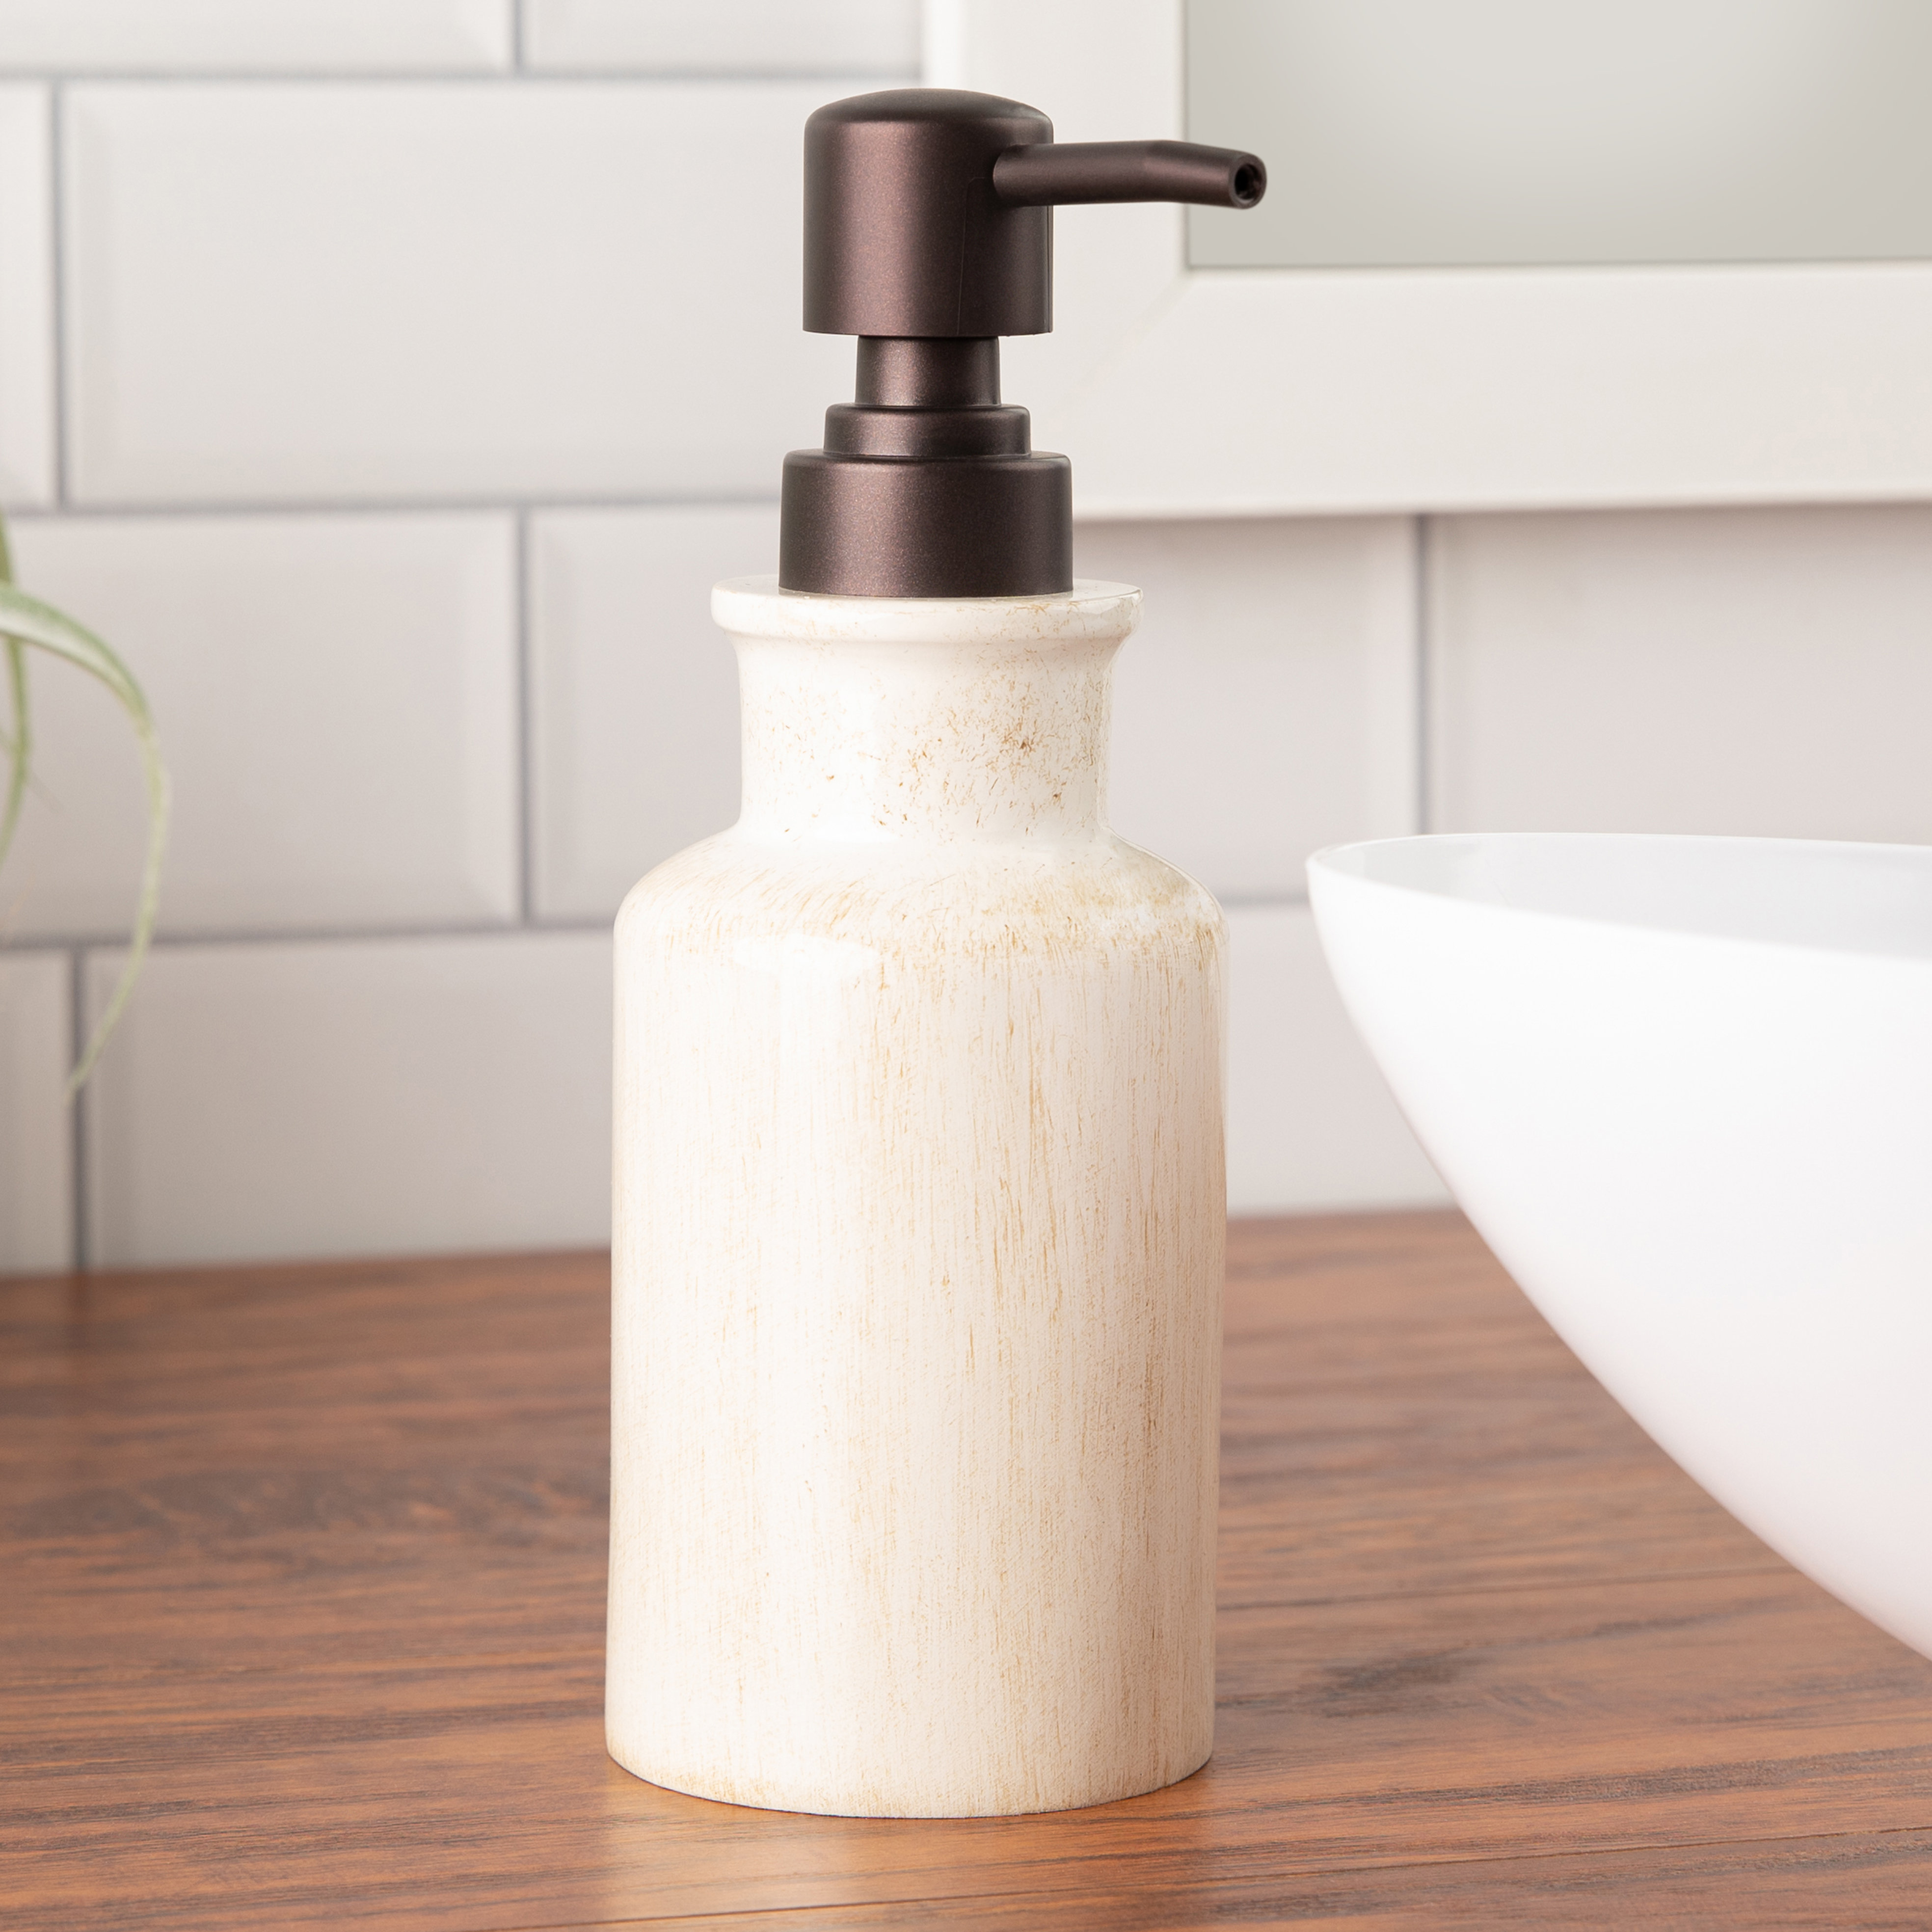 Kitchen Soap Dispenser Set with Sponge Holder and Tray - Lotion Bottle or  Liquid Dish Soap - Modern Farmhouse Soap Bottle - MADE TO ORDER